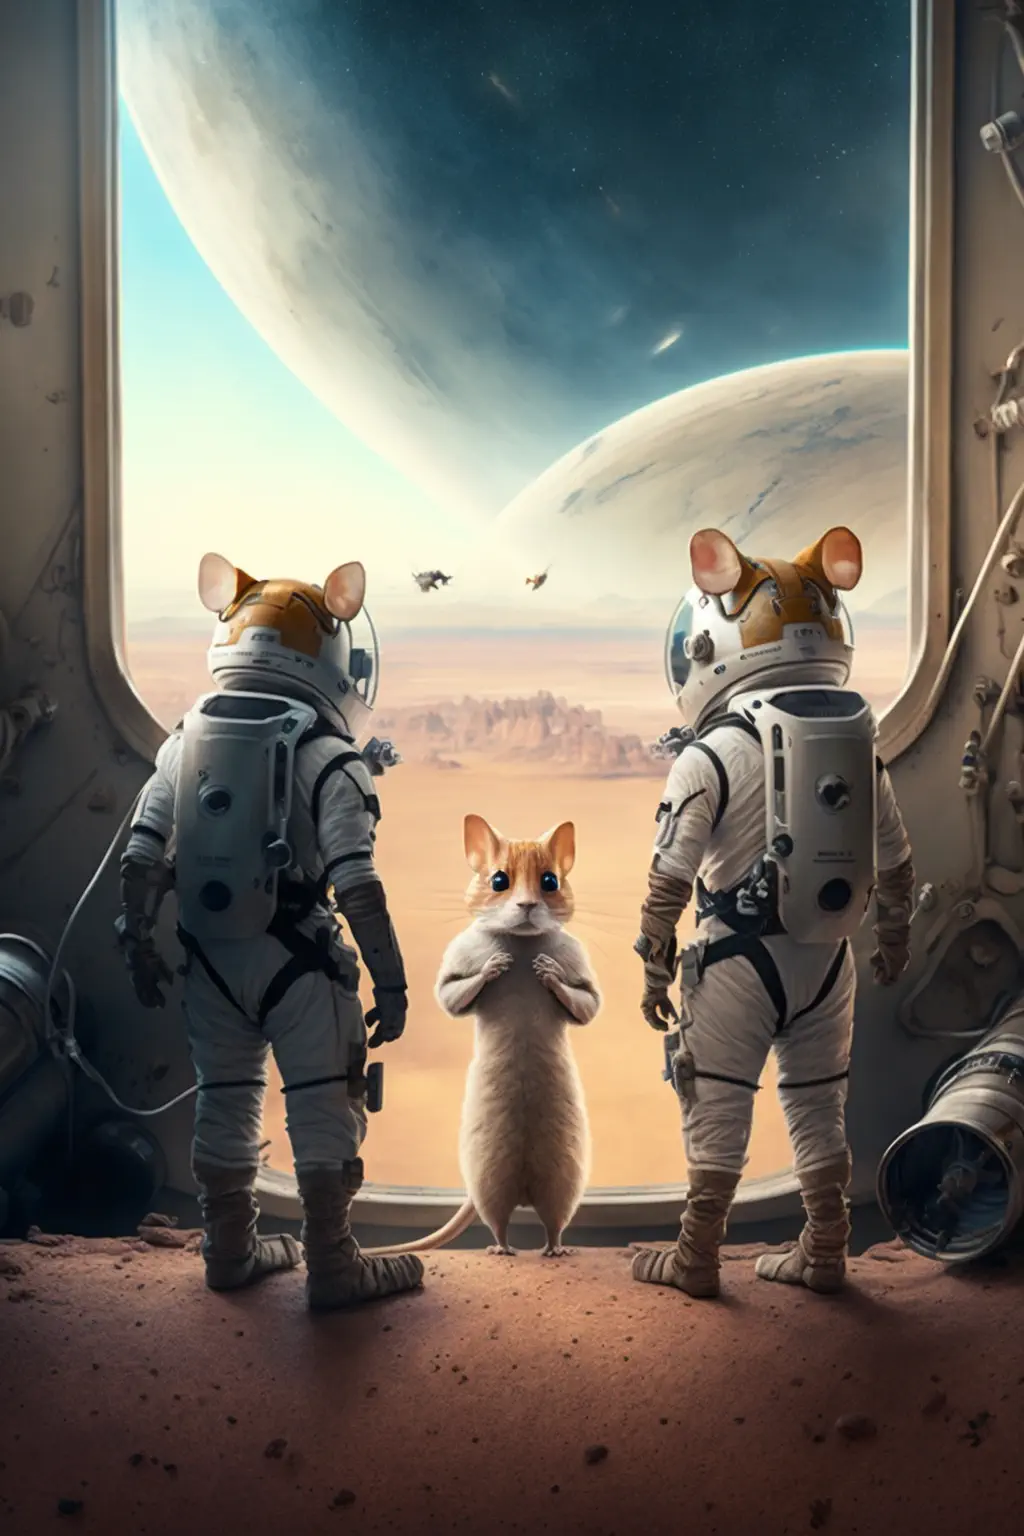 Drakosha0_two_mouse_and_two_chipmunks_in_spacesuits_are_standing_669f1b84-04f0-4a06-b7e6-e69d7e1a0fb0